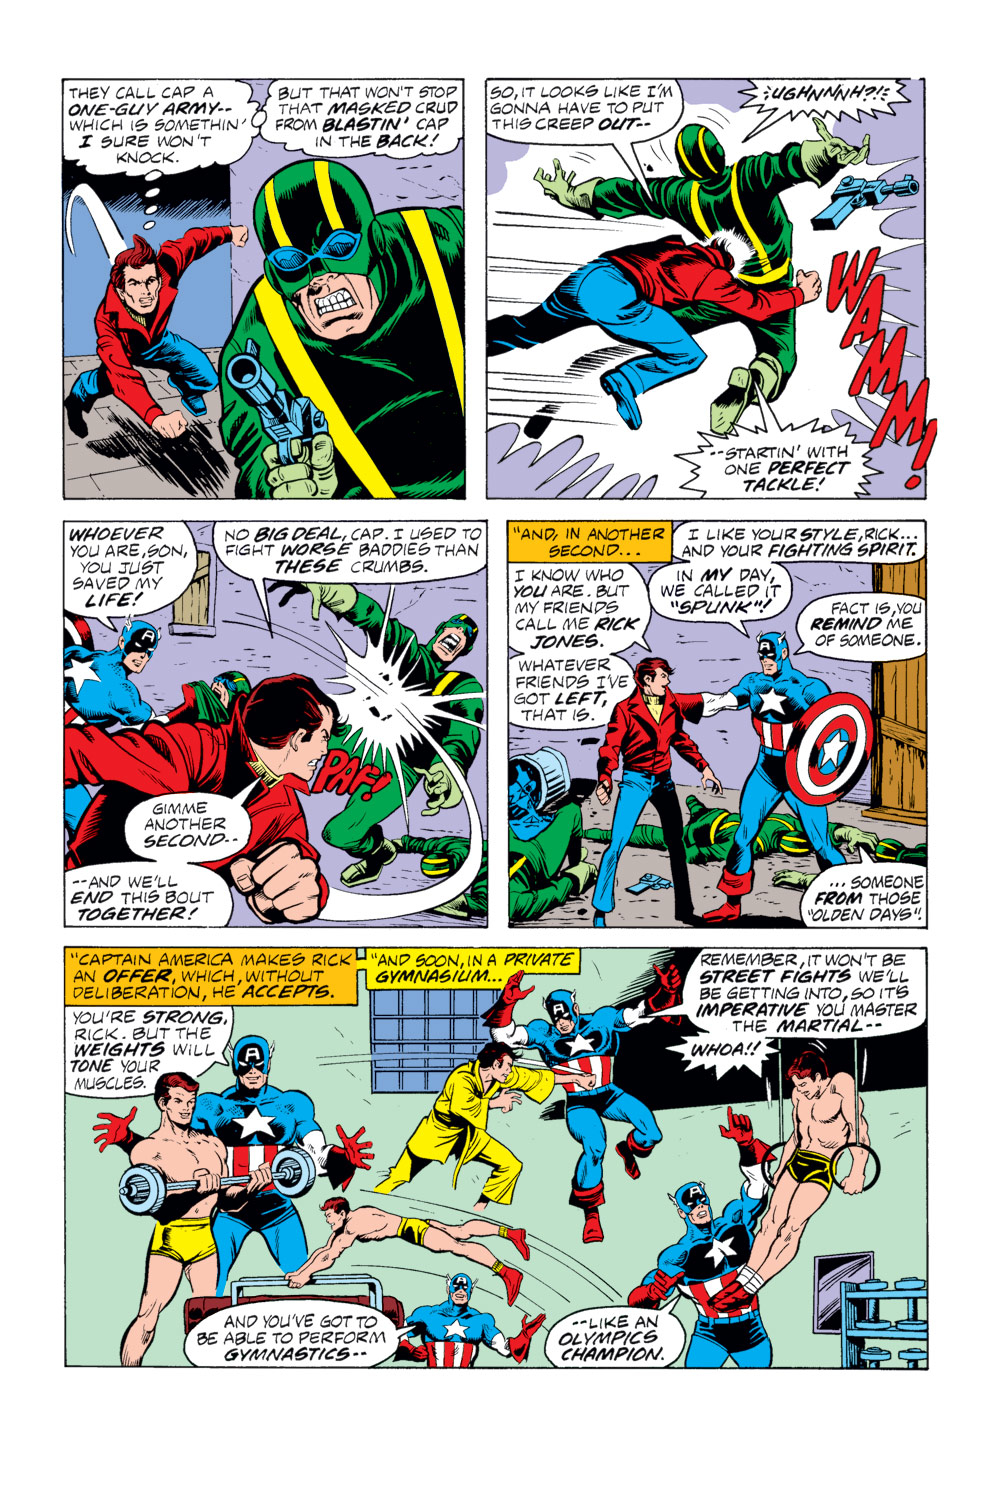 What If? (1977) issue 12 - Rick Jones had become the Hulk - Page 14